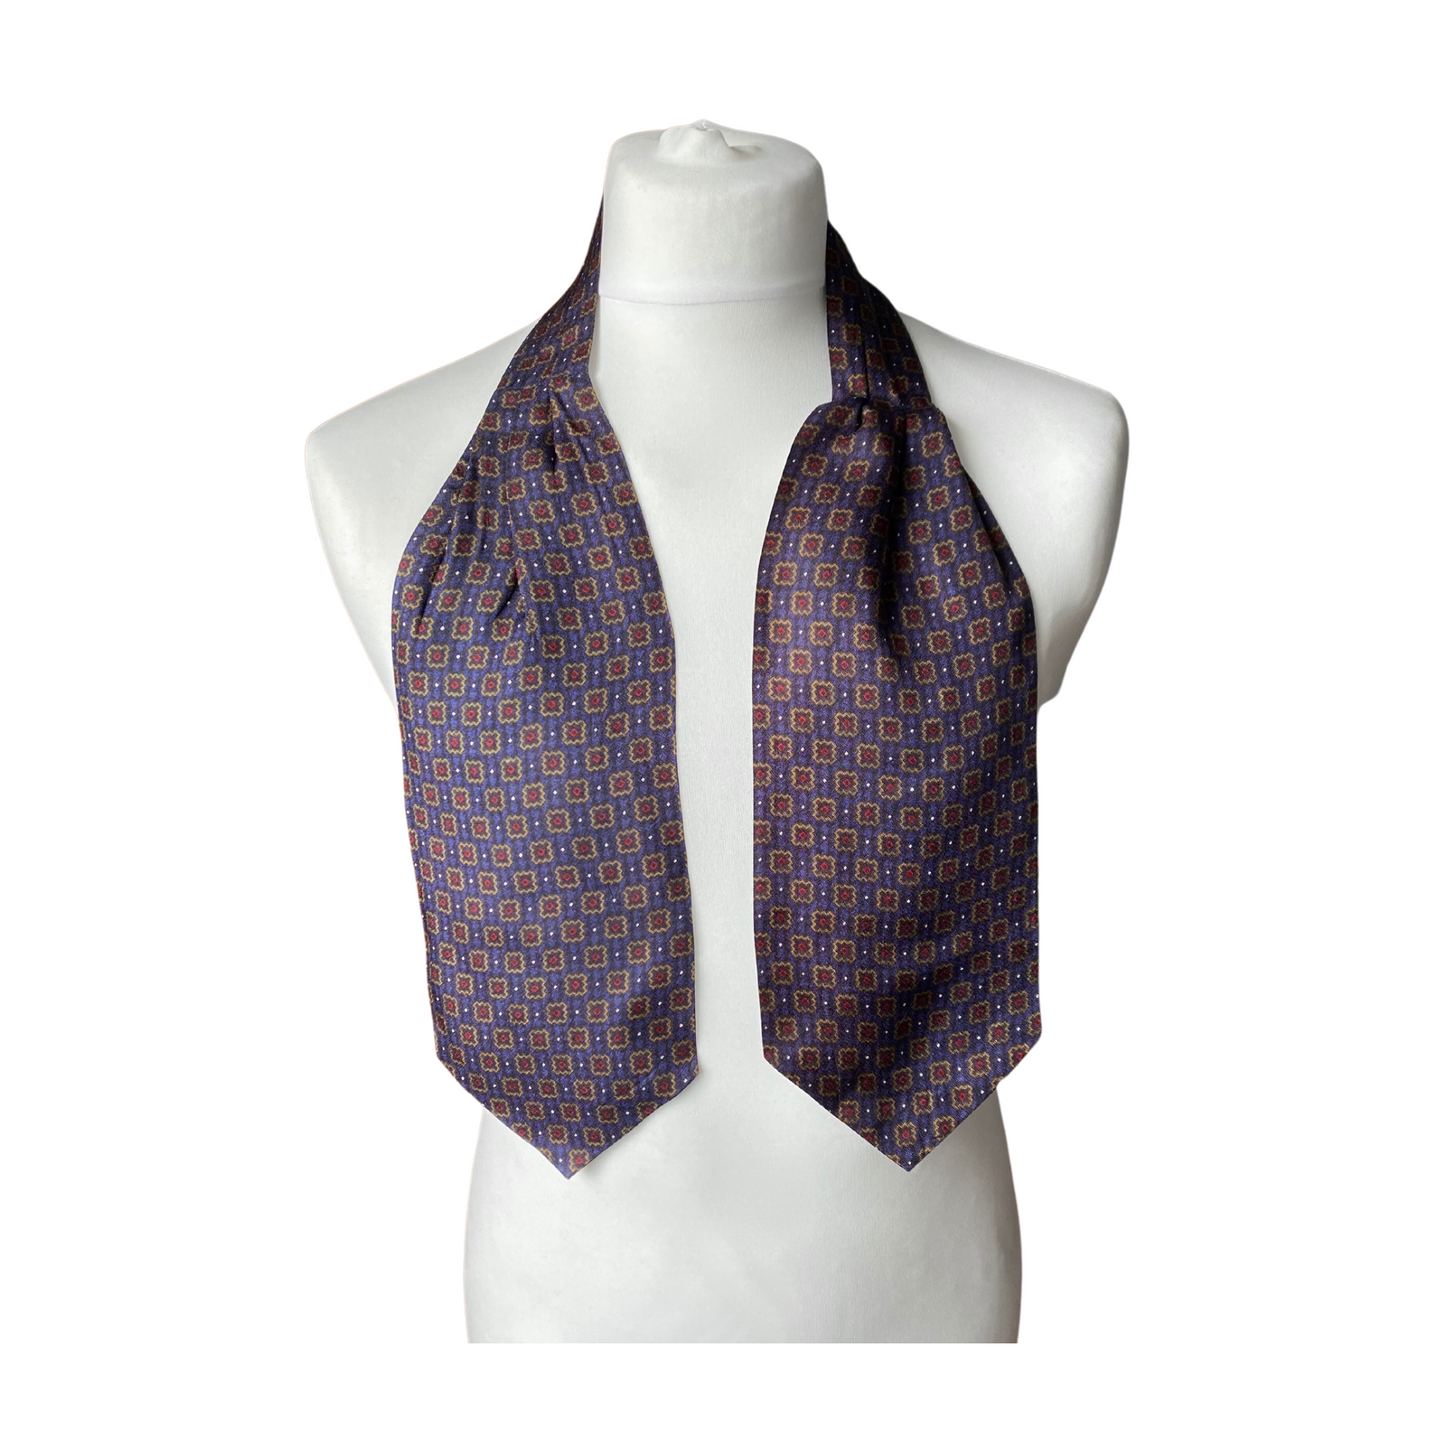 Mod style purple, gold, red and black tile print vintage cravat by British brand Duggie